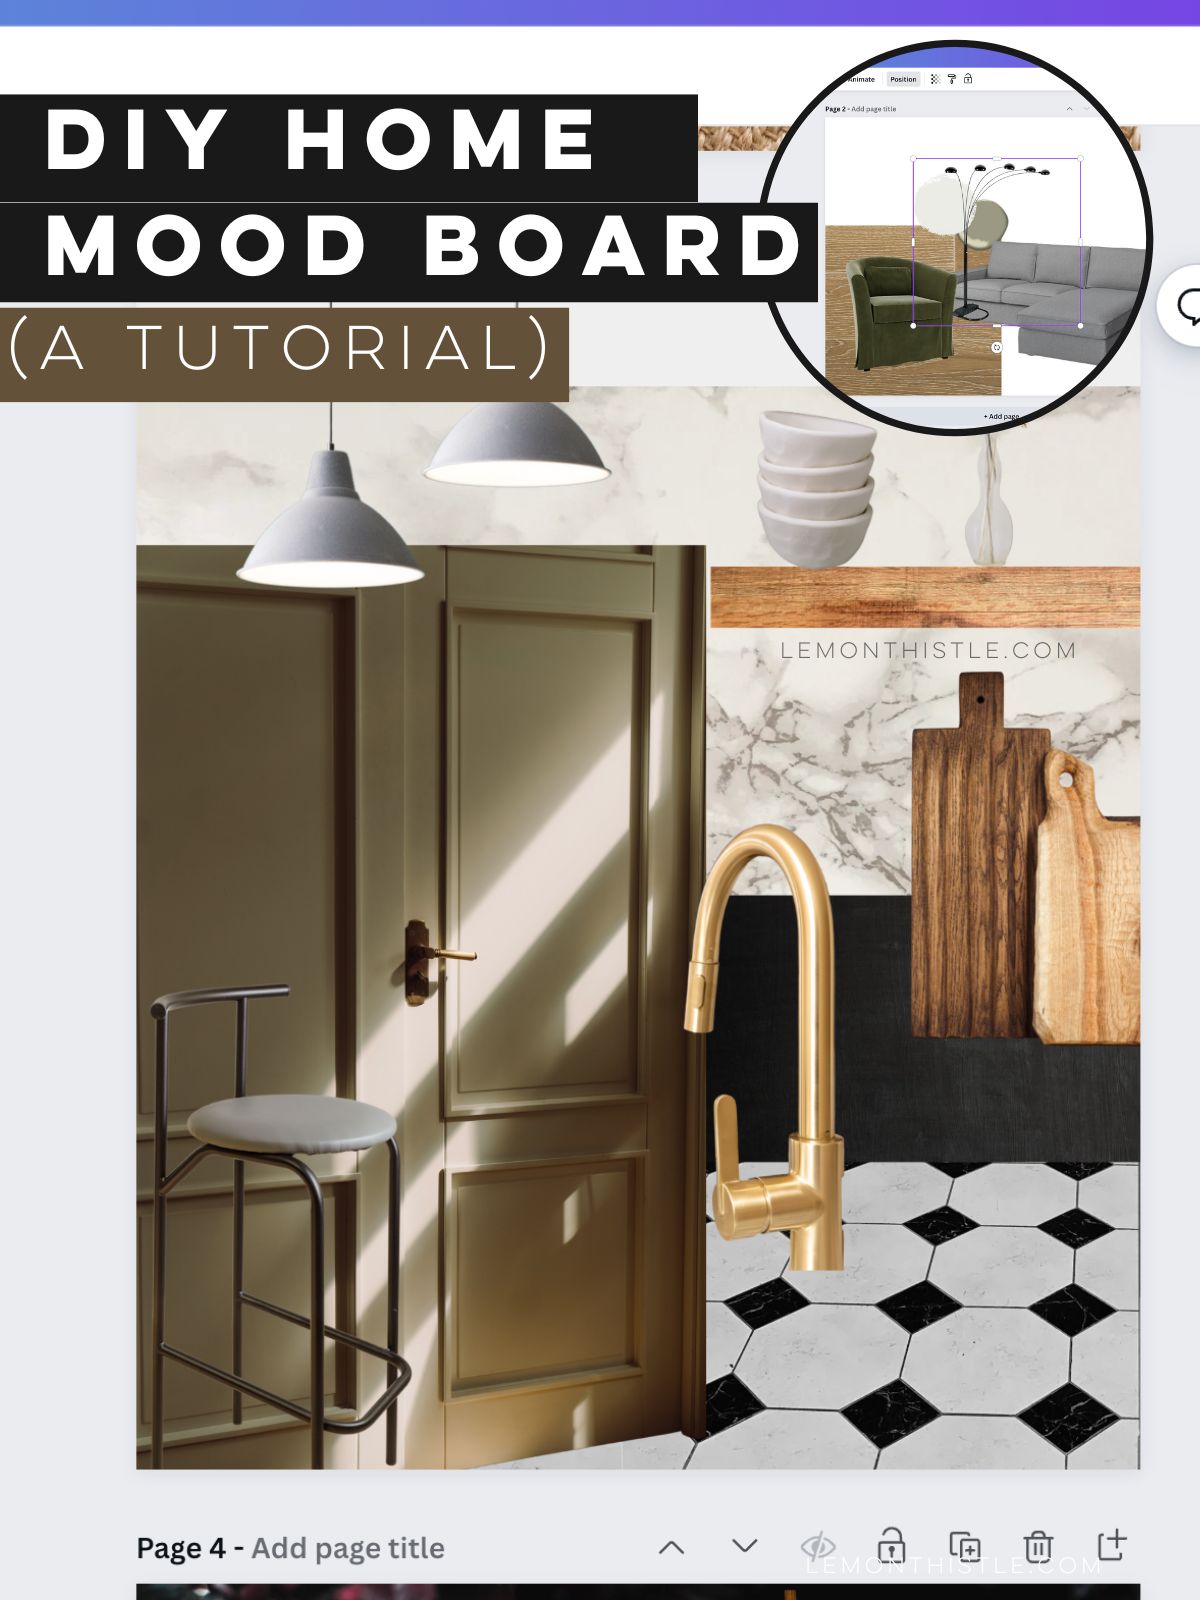 image of a kitchen design board with layered elements, image overlay of a mood board being made in canva. Text reads: How to make a mood board (a tutorial)